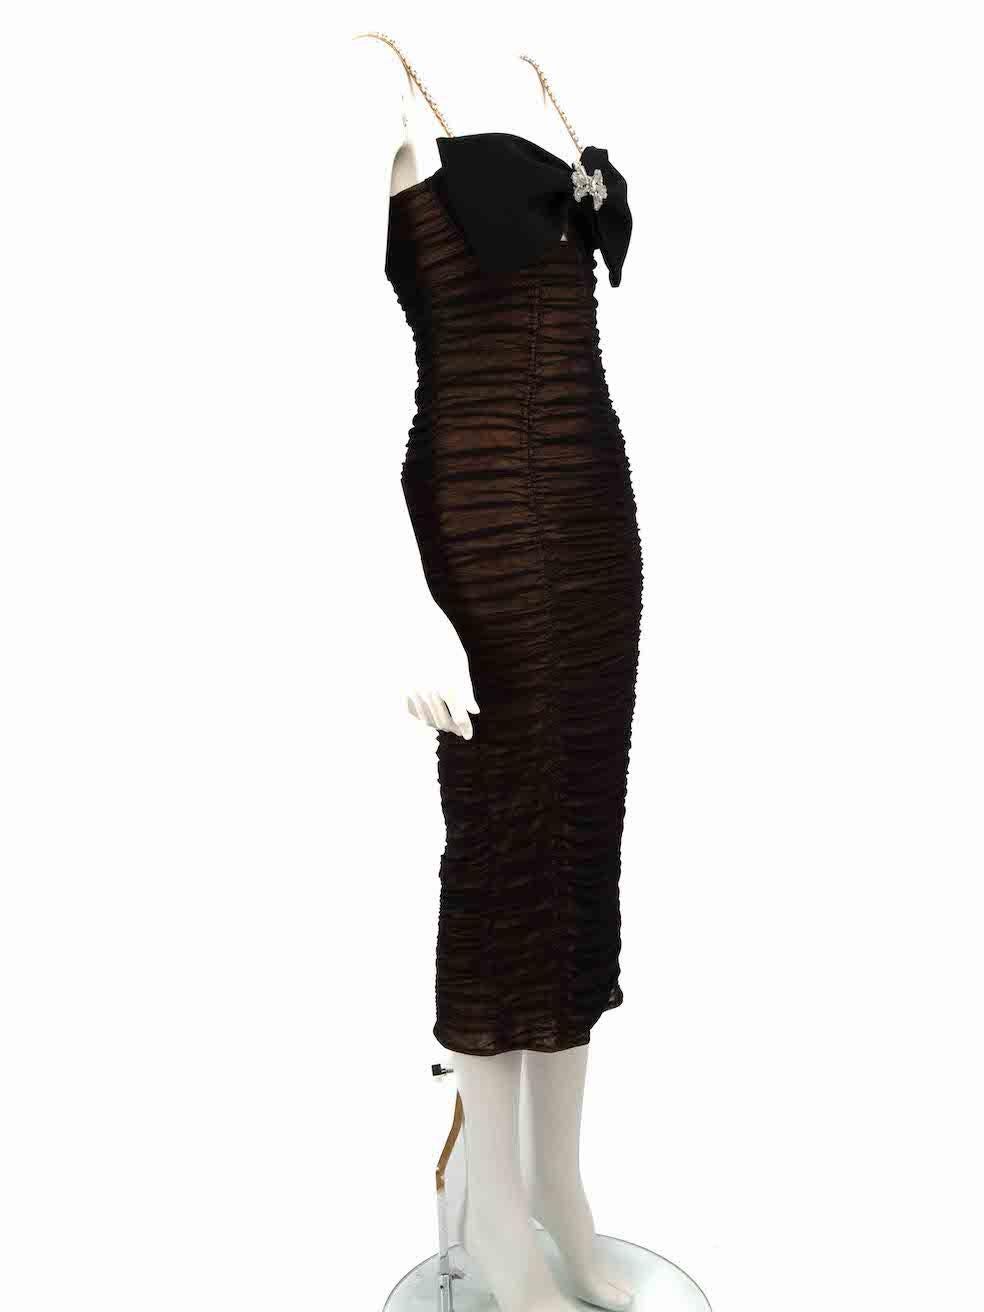 CONDITION is Very good. Minimal wear to dress is evident. Minimal wear to the crystal embellishment at the bust with a small chip to a crystal on this used Self-Portrait designer resale item.
 
 
 
 Details
 
 
 Black
 
 Polyester
 
 Midi bodycon